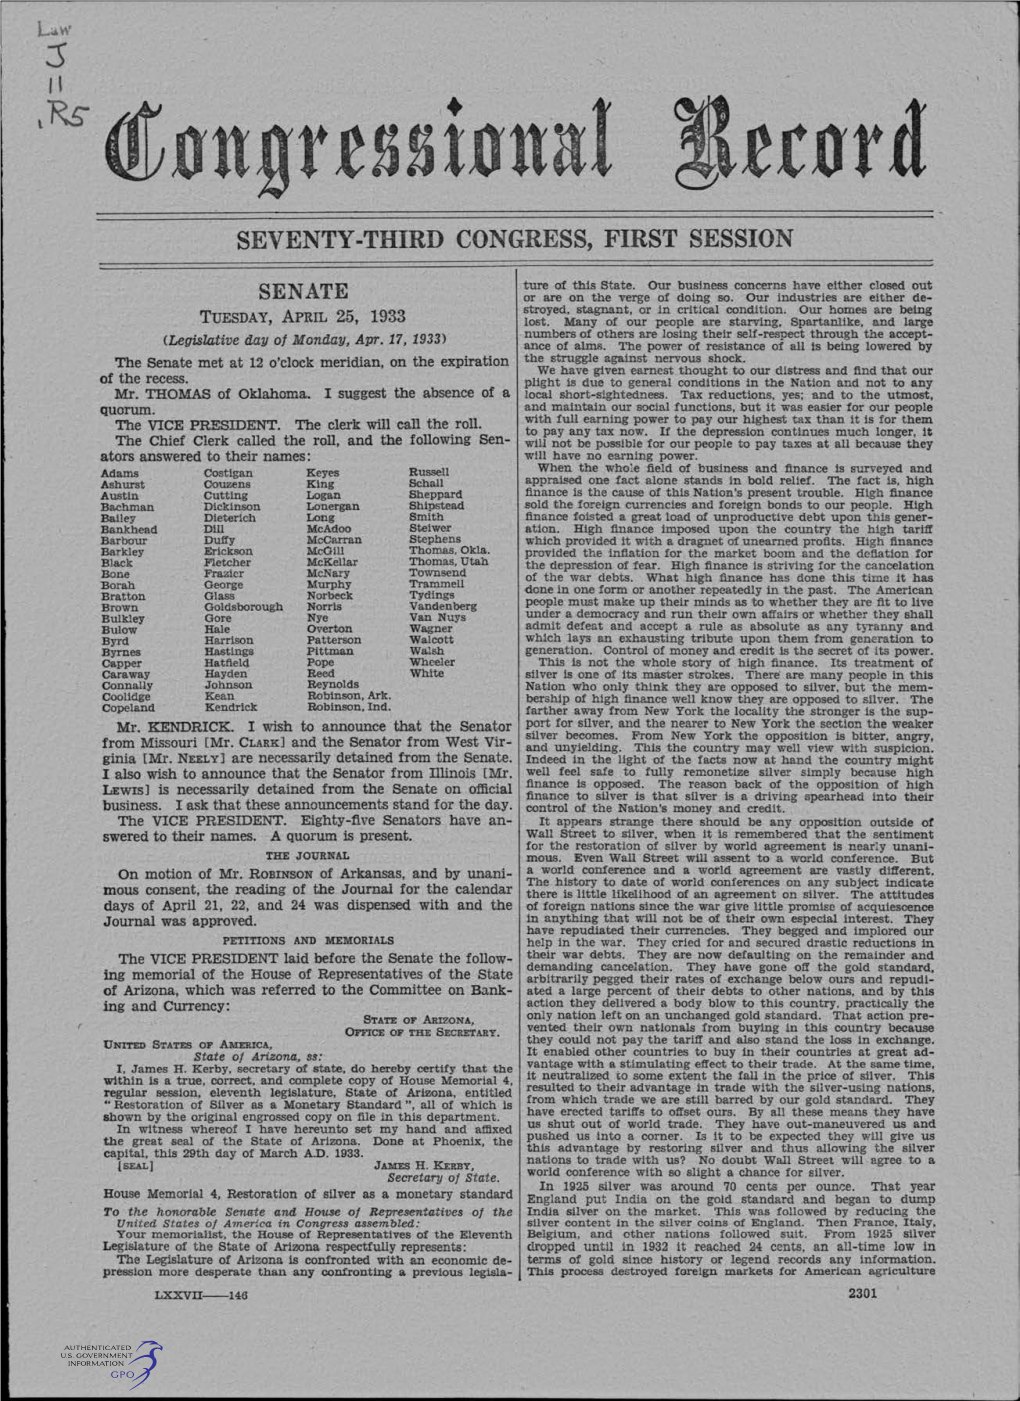 Seventy-Third Congress, First Session